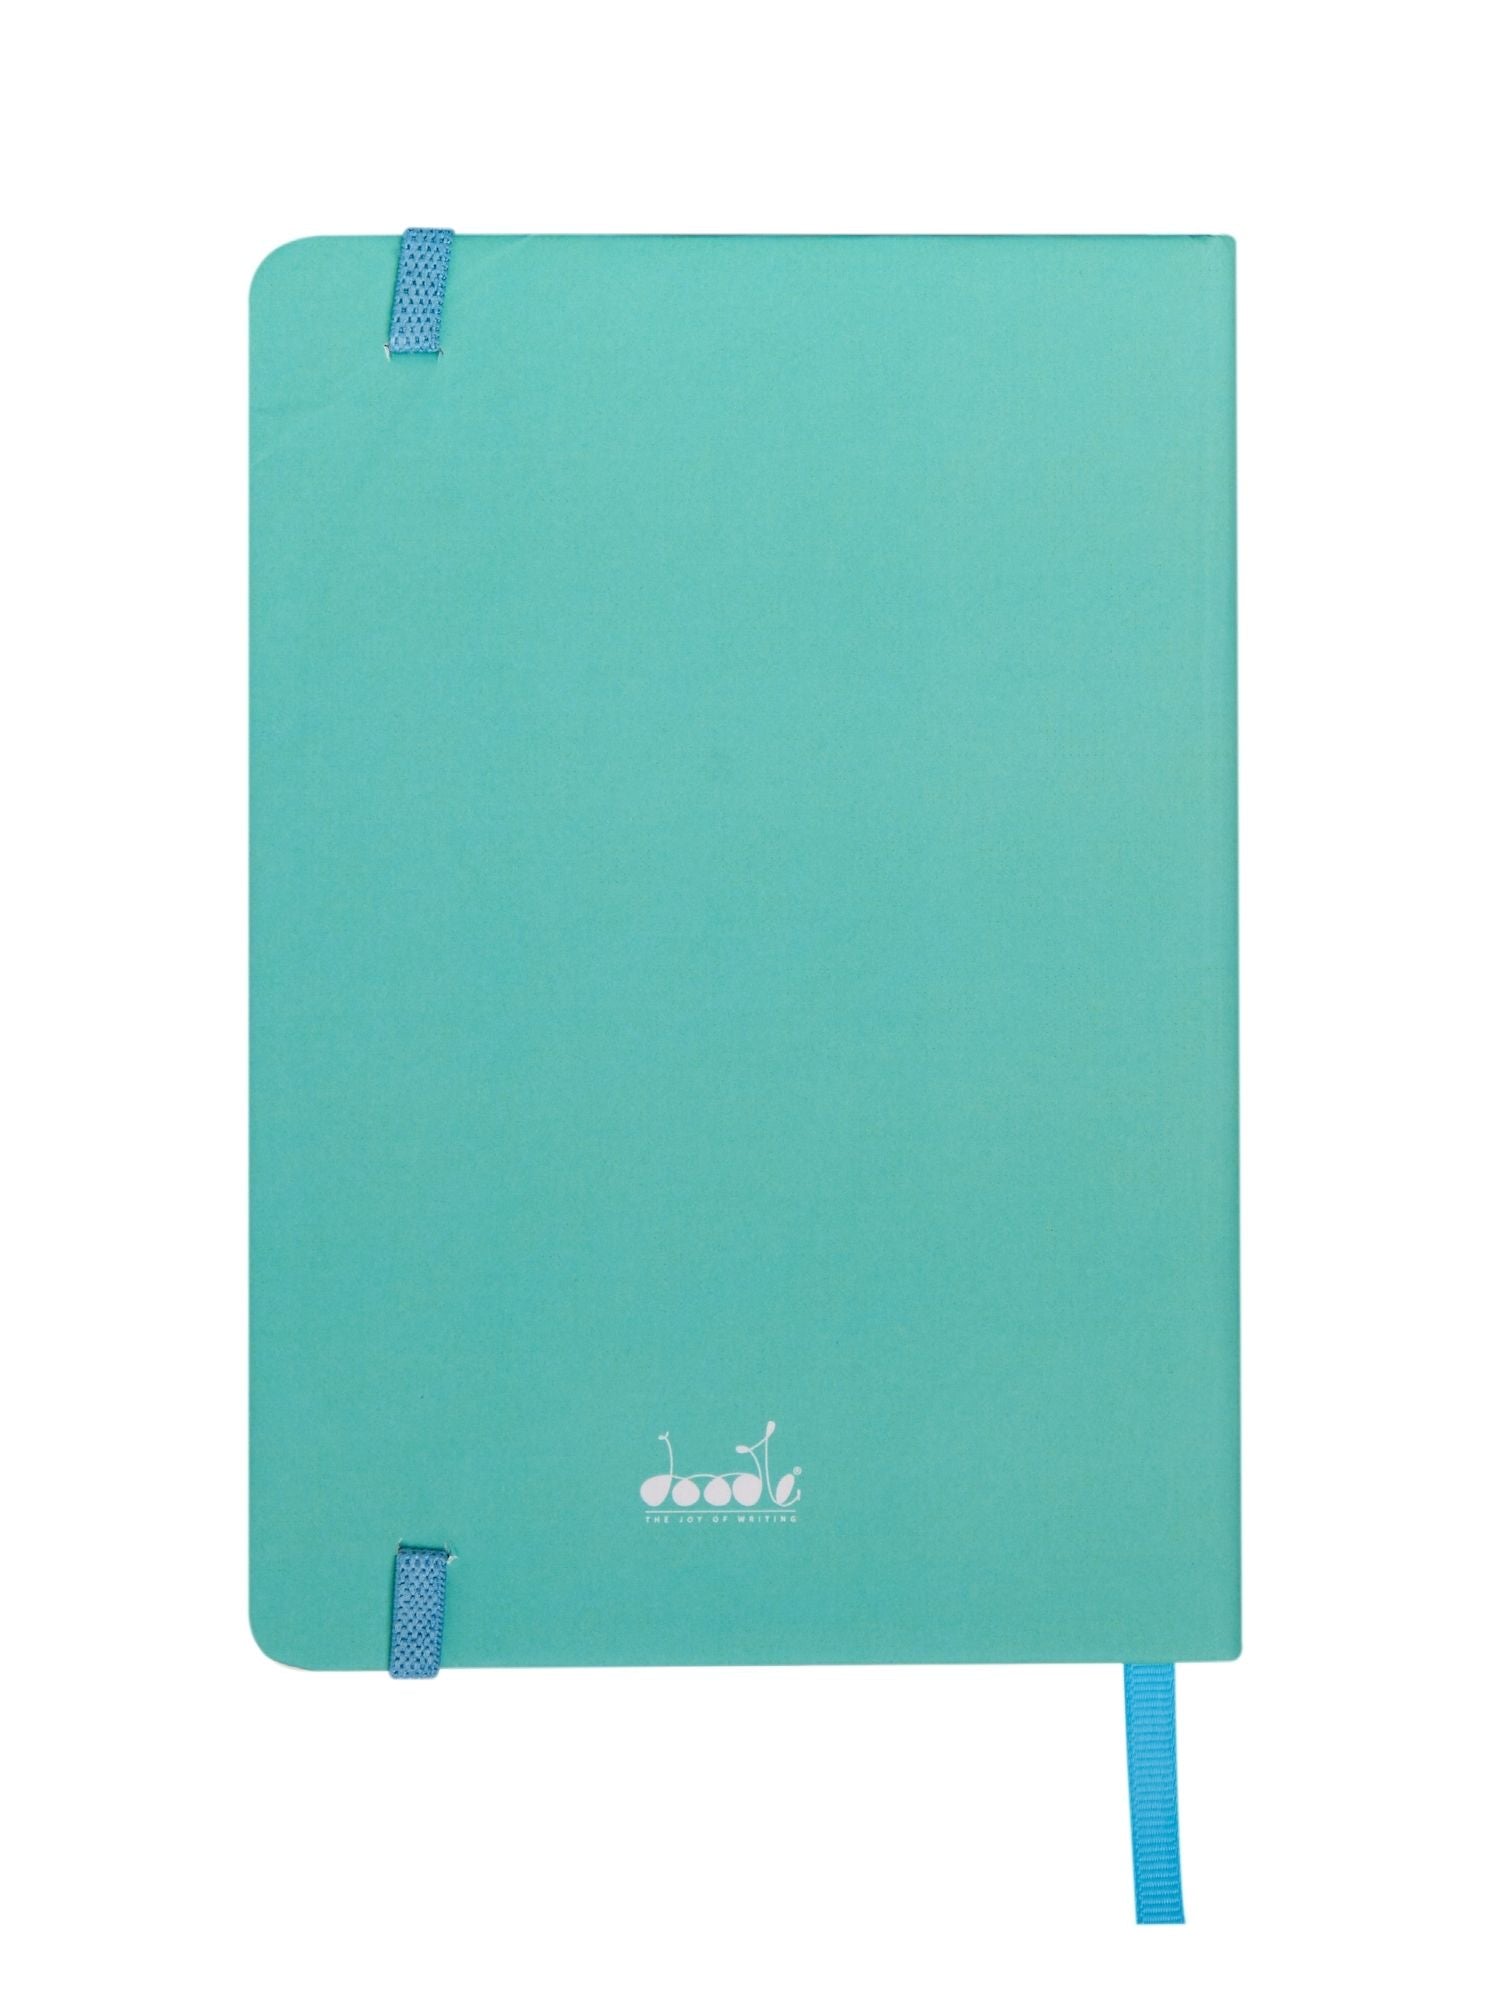 DOODLE Expressions Hardbound B6 Diary Notebook - THINKER